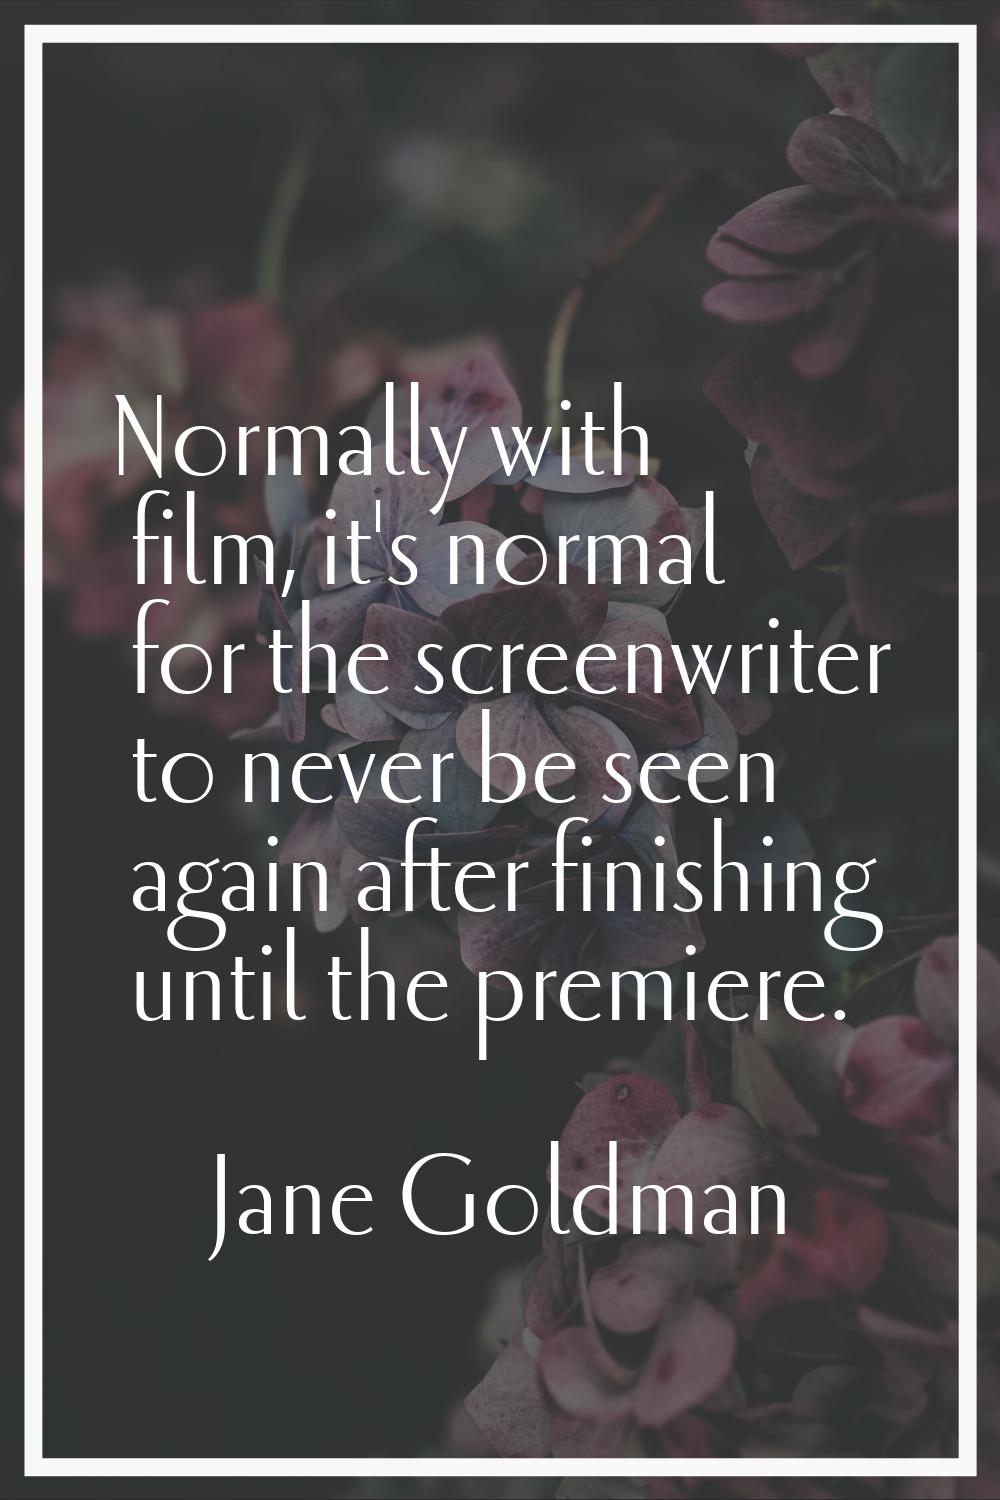 Normally with film, it's normal for the screenwriter to never be seen again after finishing until t